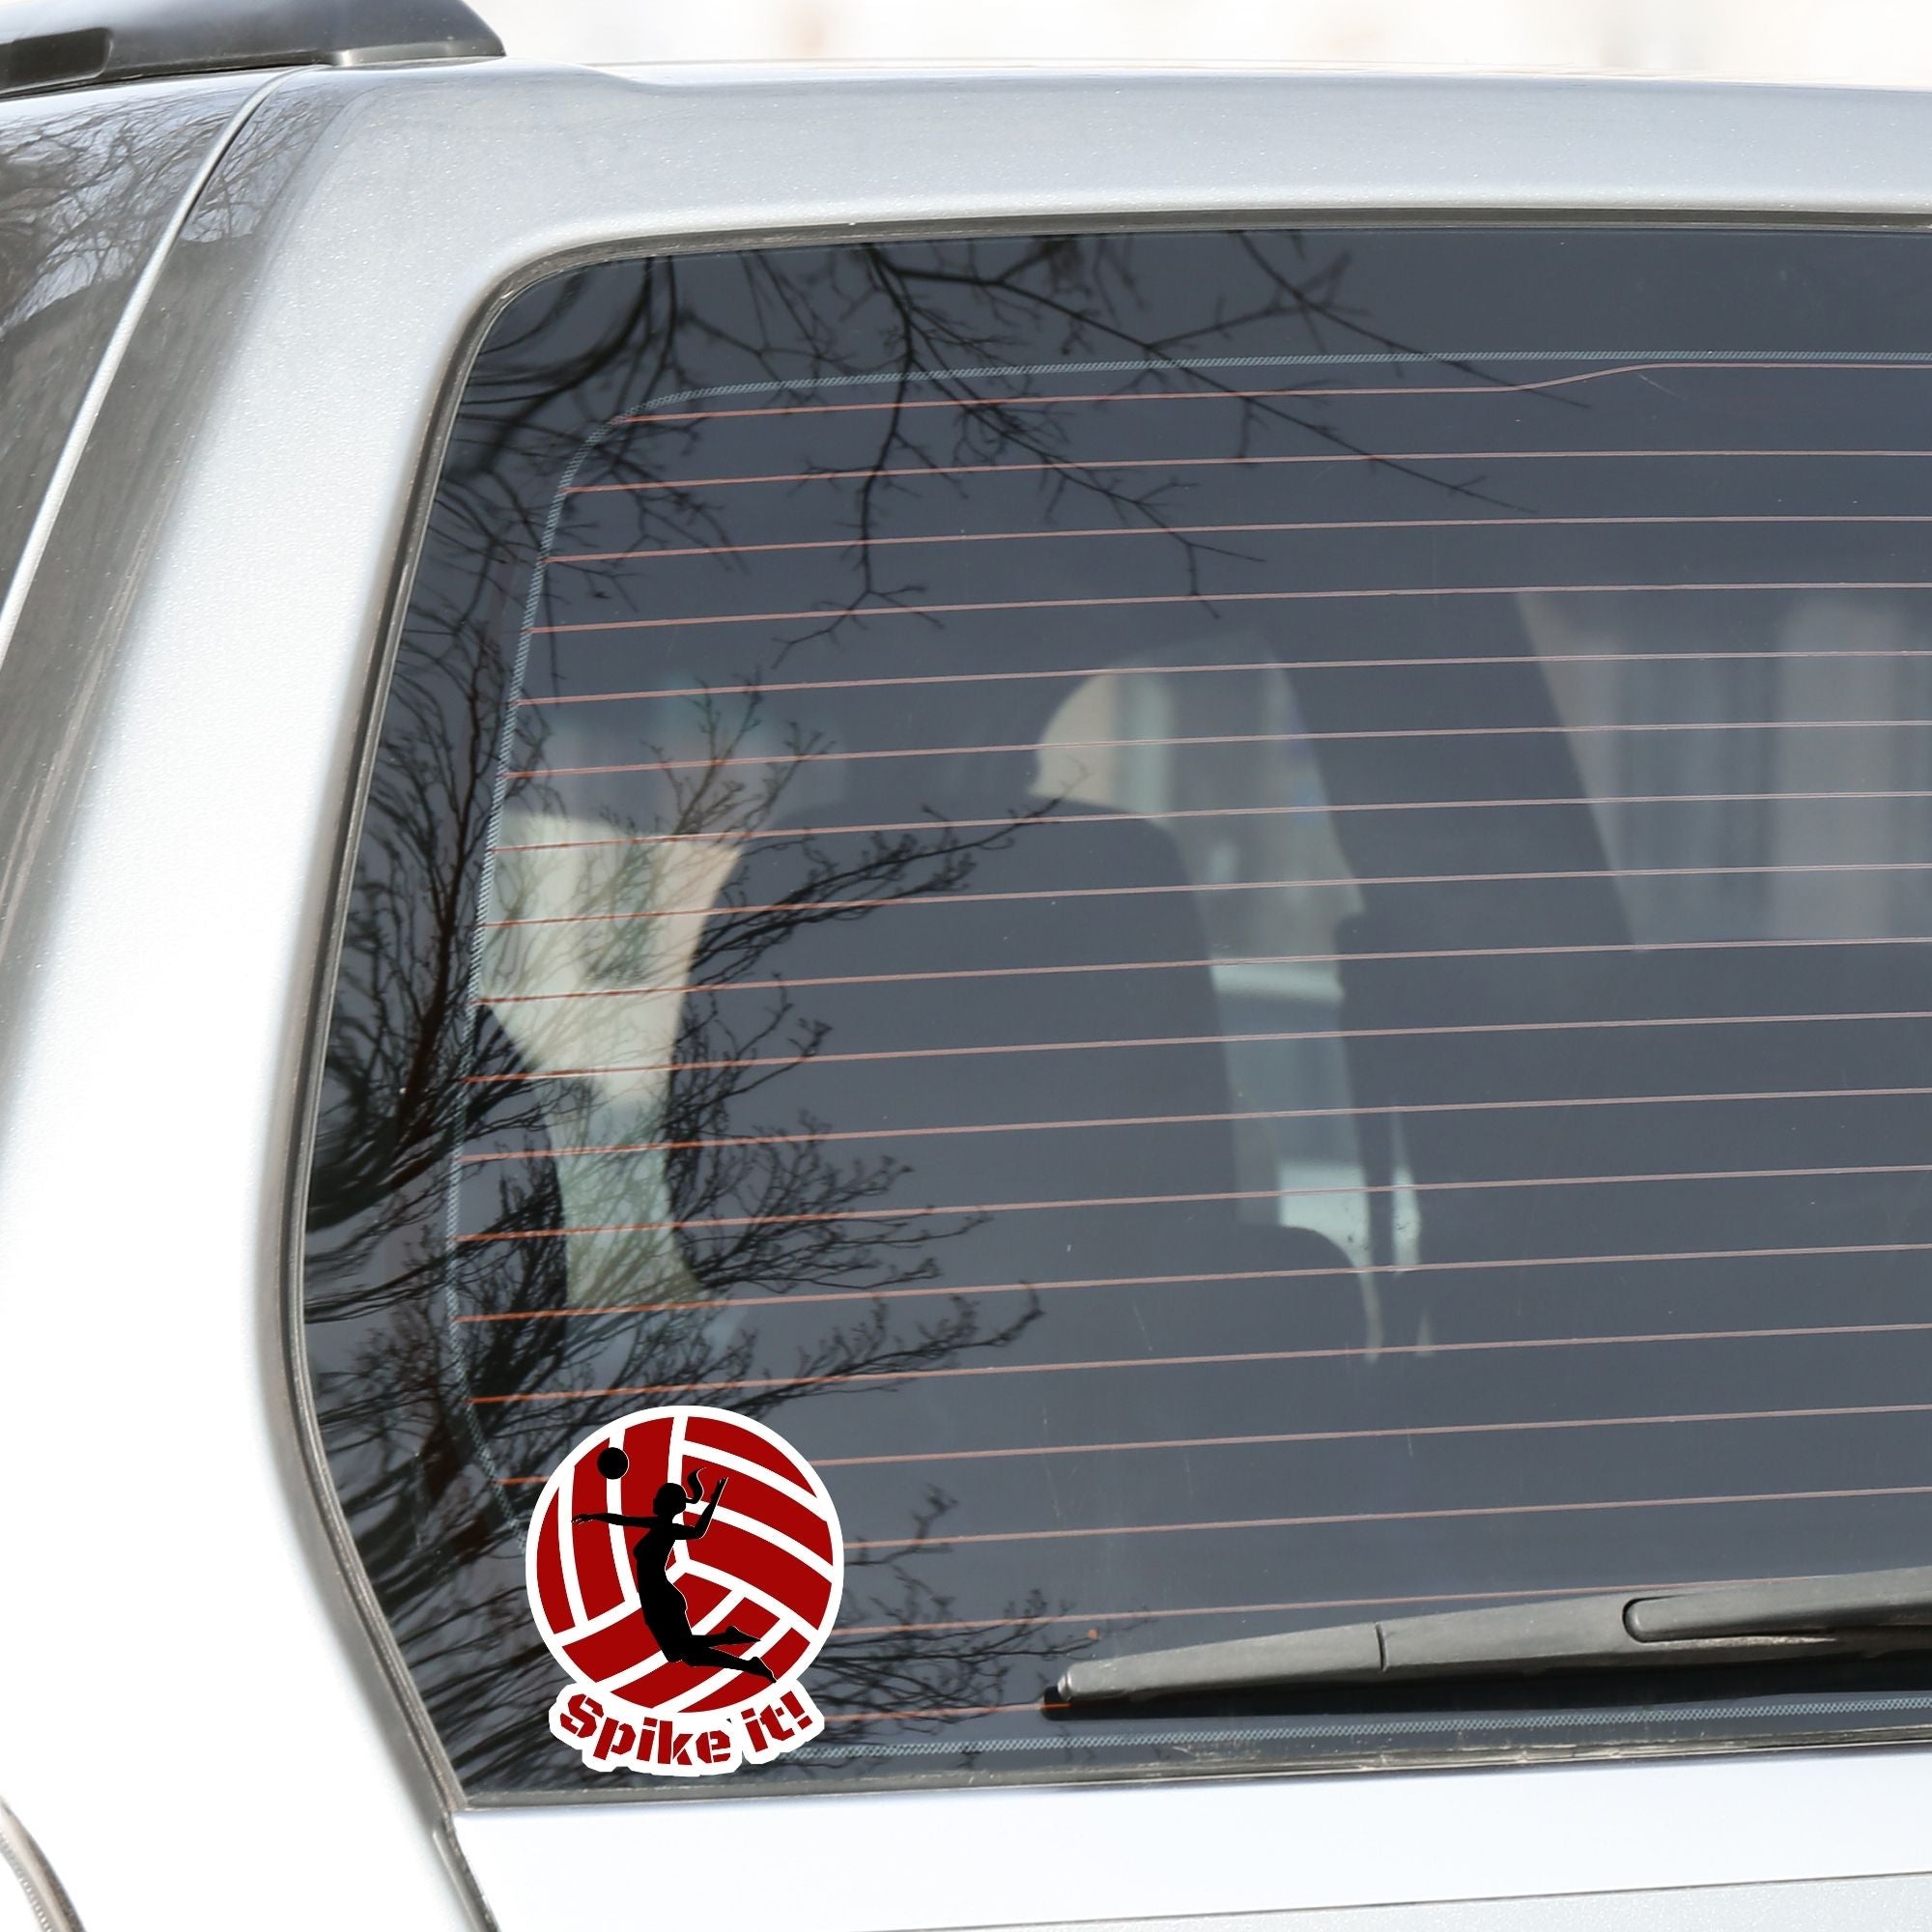 Show your love of volleyball with this individual die-cut sticker! This sticker shows the silhouette of a player with a ponytail about to spike the ball, on a maroon and white volleyball background, with the words "Spike it!" below. This image shows the volleyball sticker on the back window of a car.